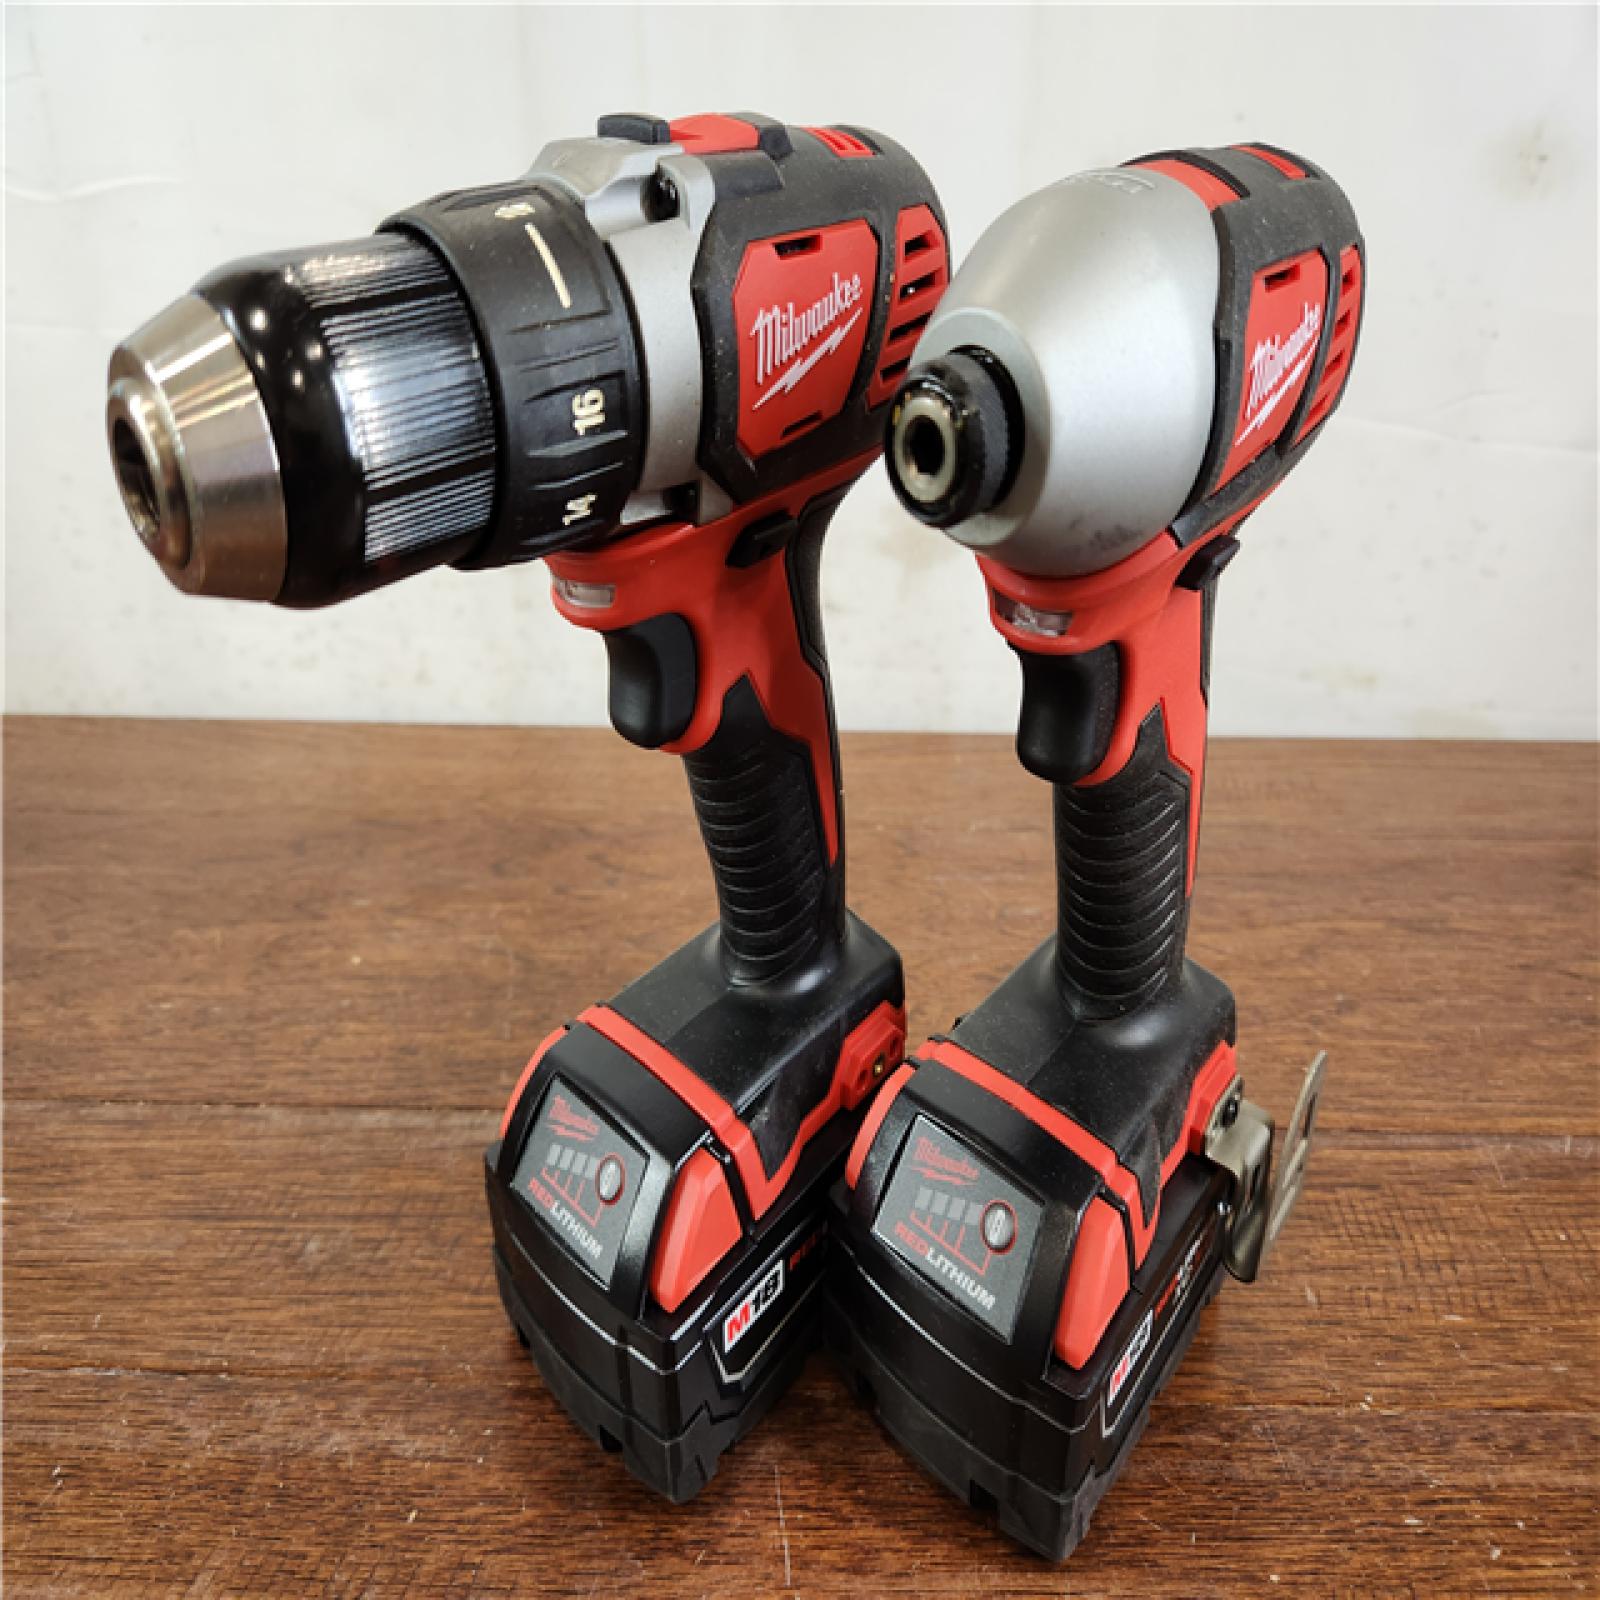 AS-IS Milwaukee M18 Brushed Cordless Variable Speed LED Light (7-Tool) Combo Kit